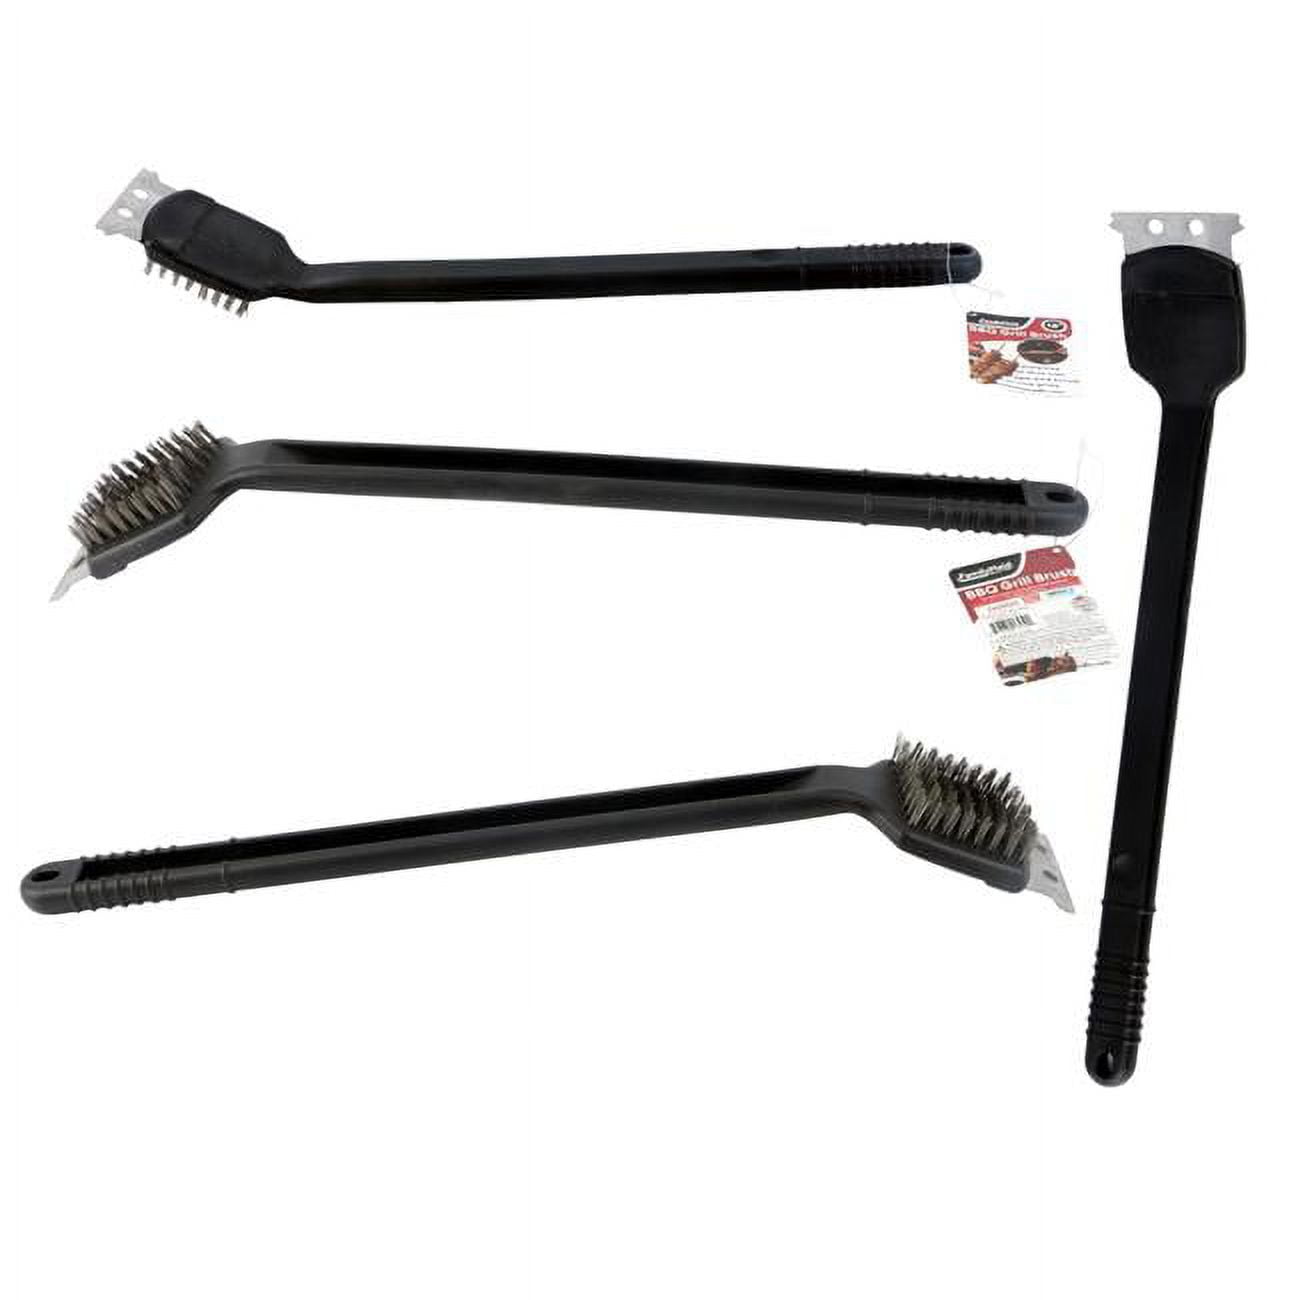 Picture of Family Maid 13450 17.25 in. BBQ Grill Brush - Pack of 96